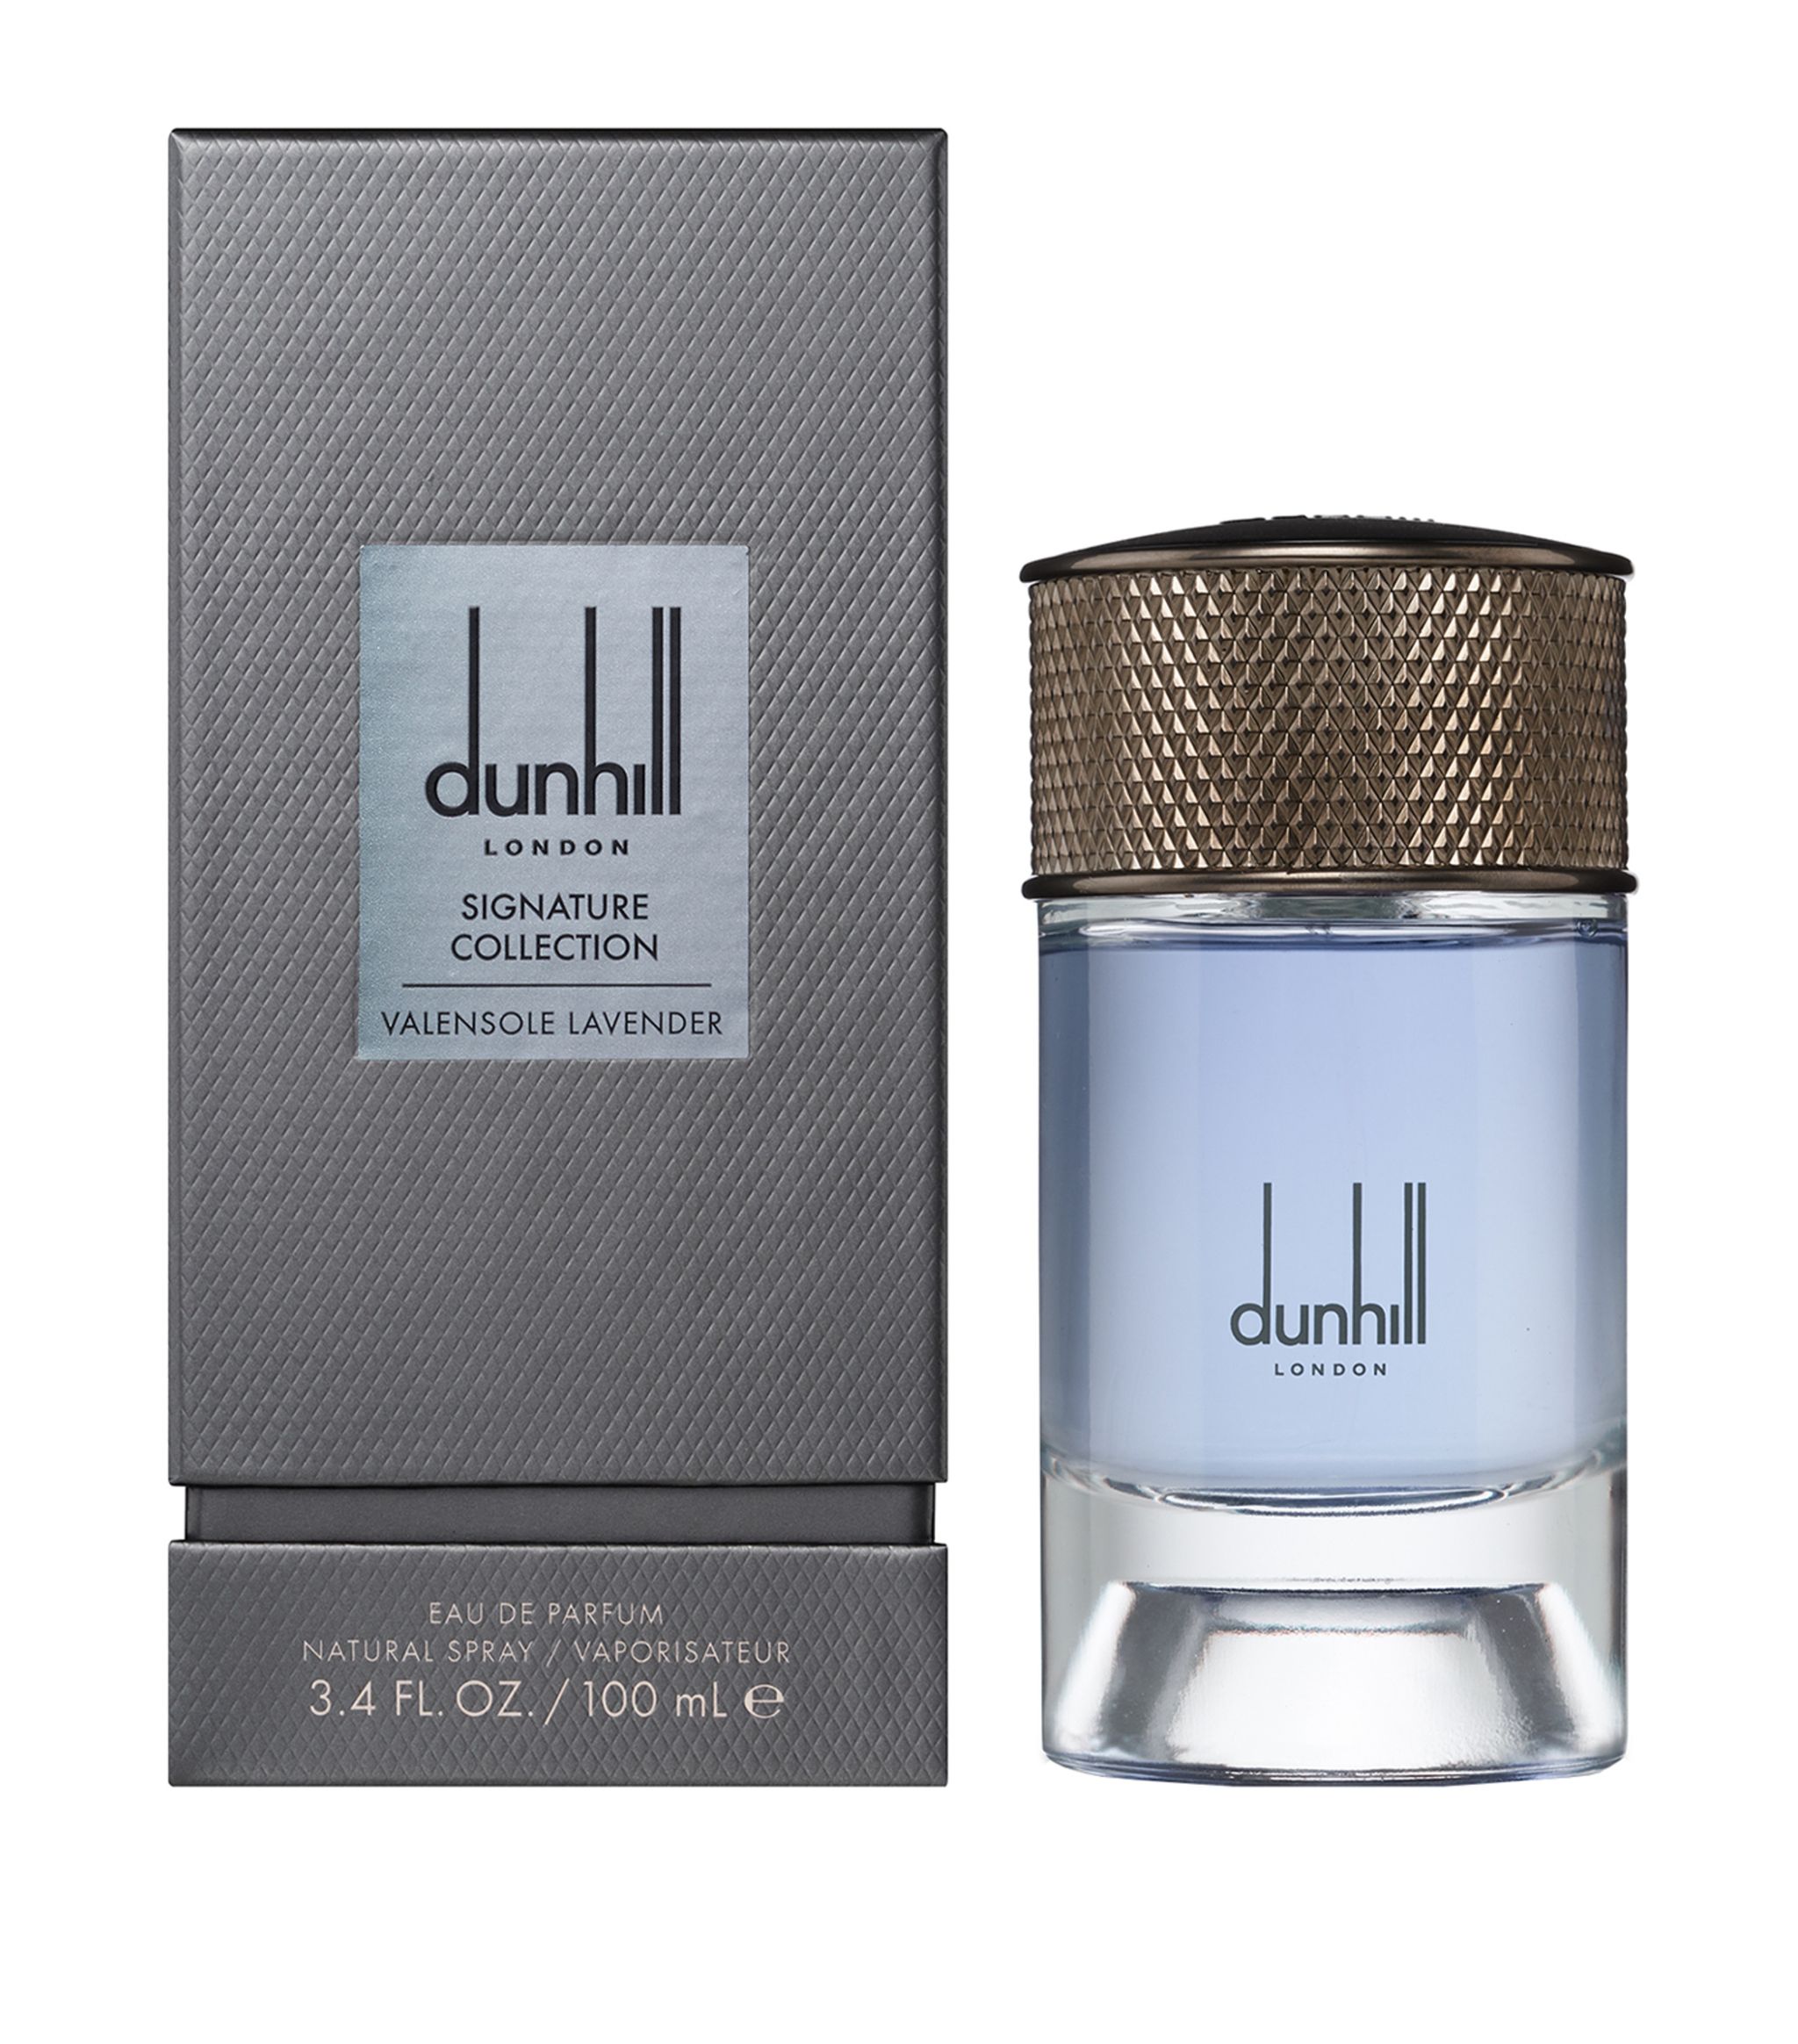 Dunhill Signature Collection: Amalfi Citrus and Valensole Lavender ...